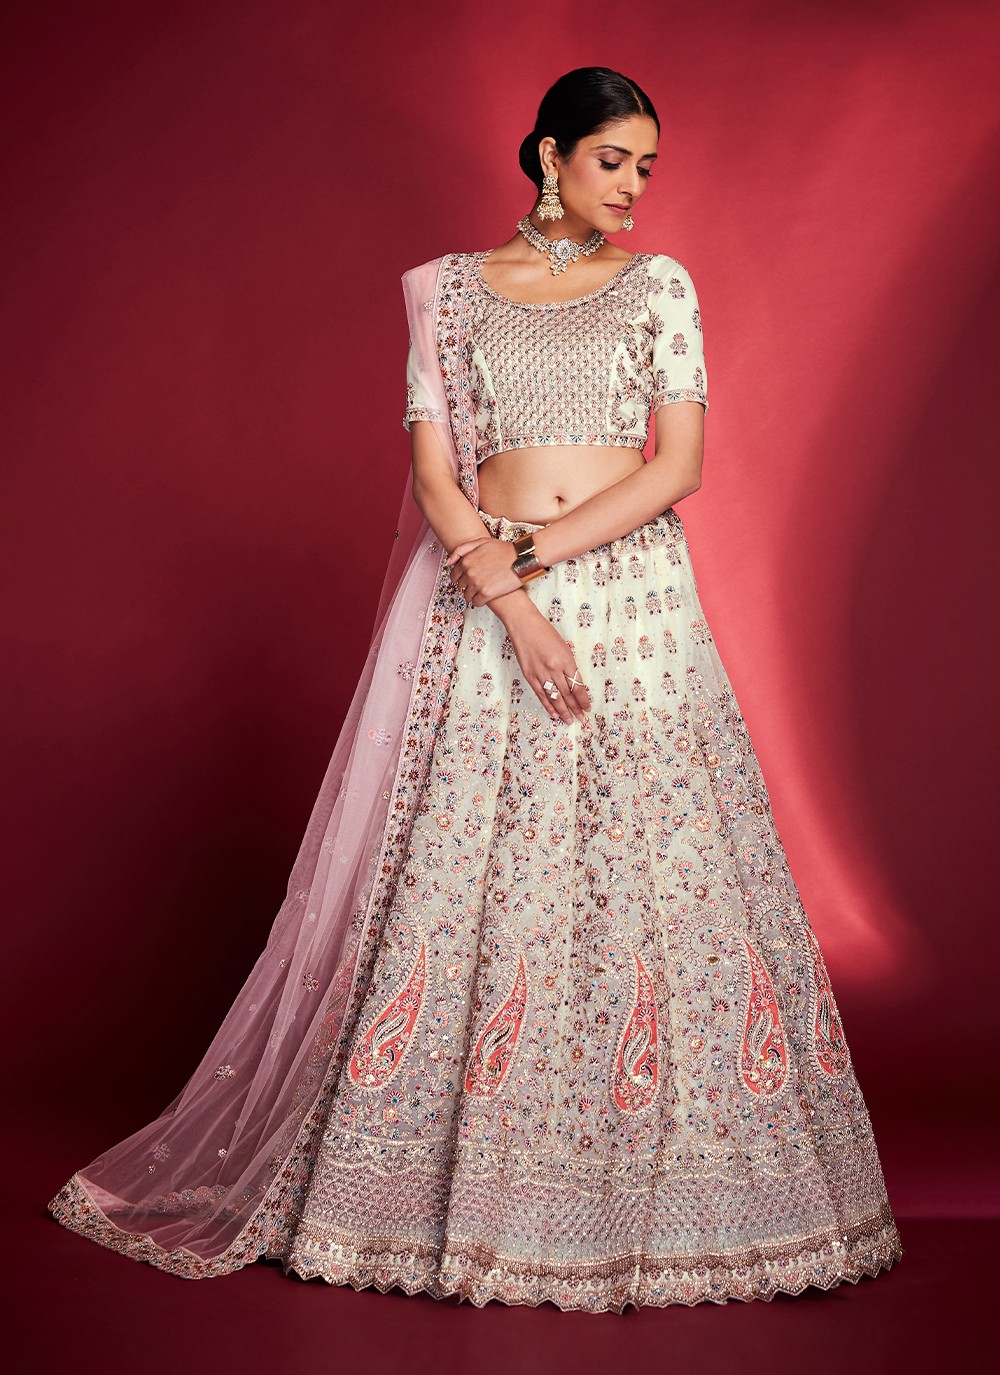 Buy Affordable Bridal Lehengas From These Designers Under INR 50K | Indian  outfits lehenga, Indian fashion dresses, Dress indian style